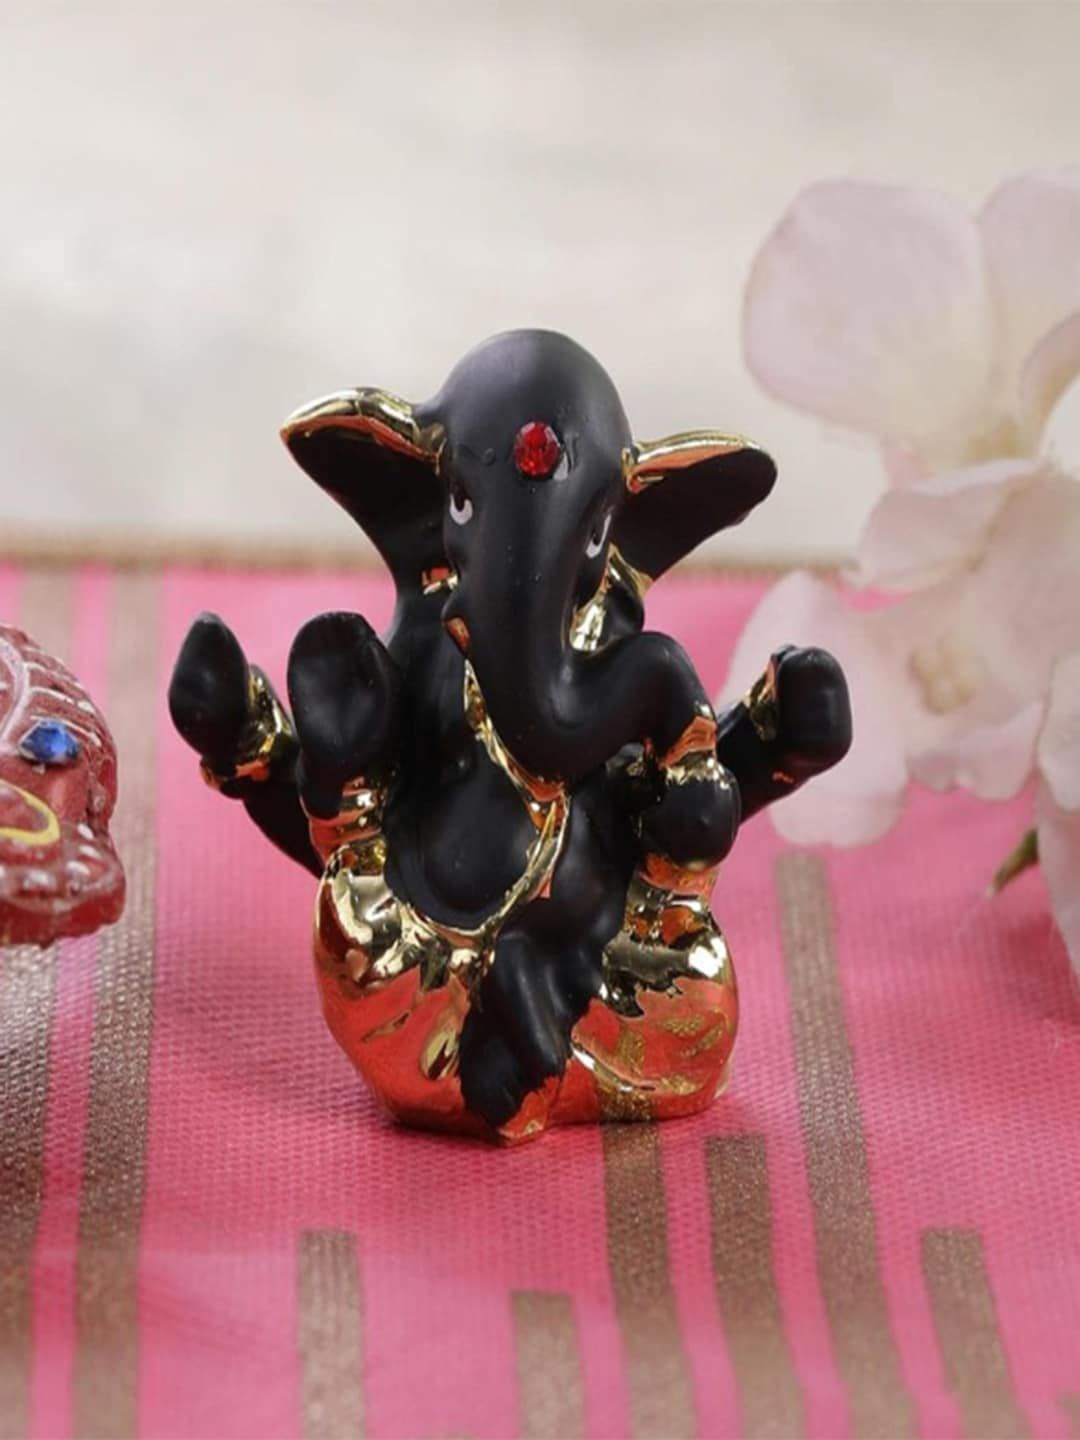 Gallery99 Gold-Colored & Black Handpainted Lord Ganpati Idol Showpieces Price in India